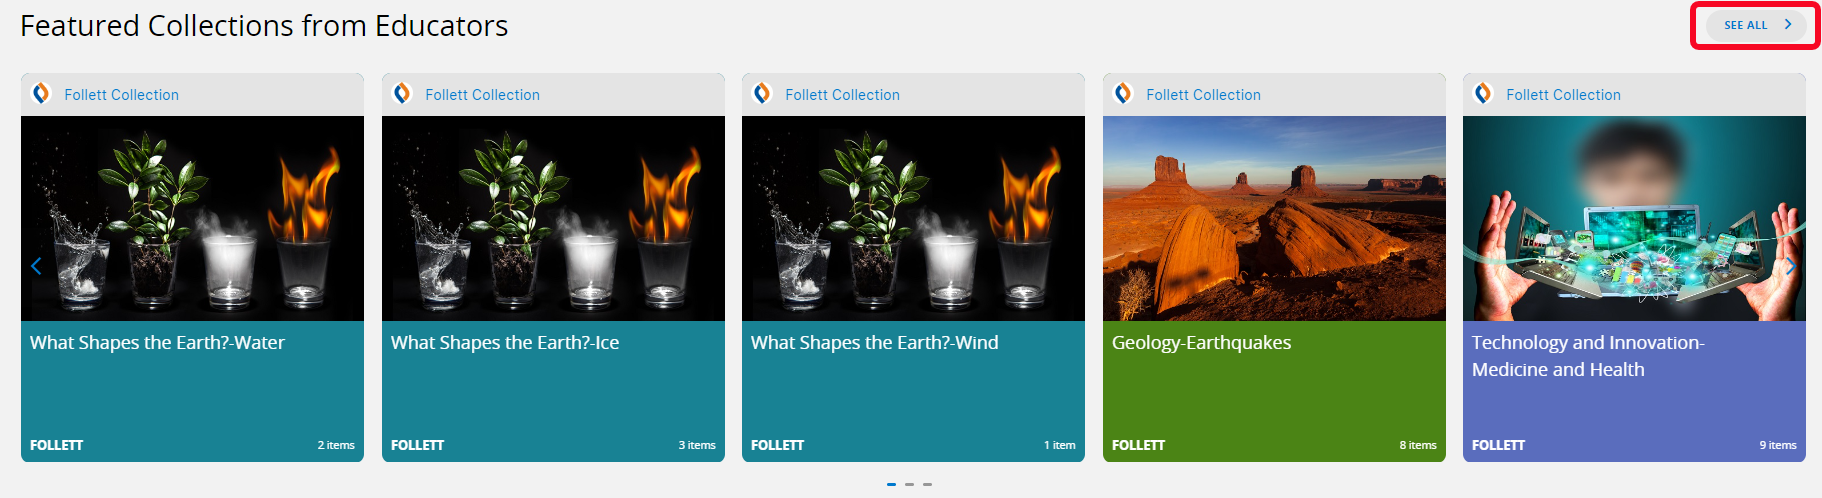 Featured Collections from Educators ribbon on the Featured tab.